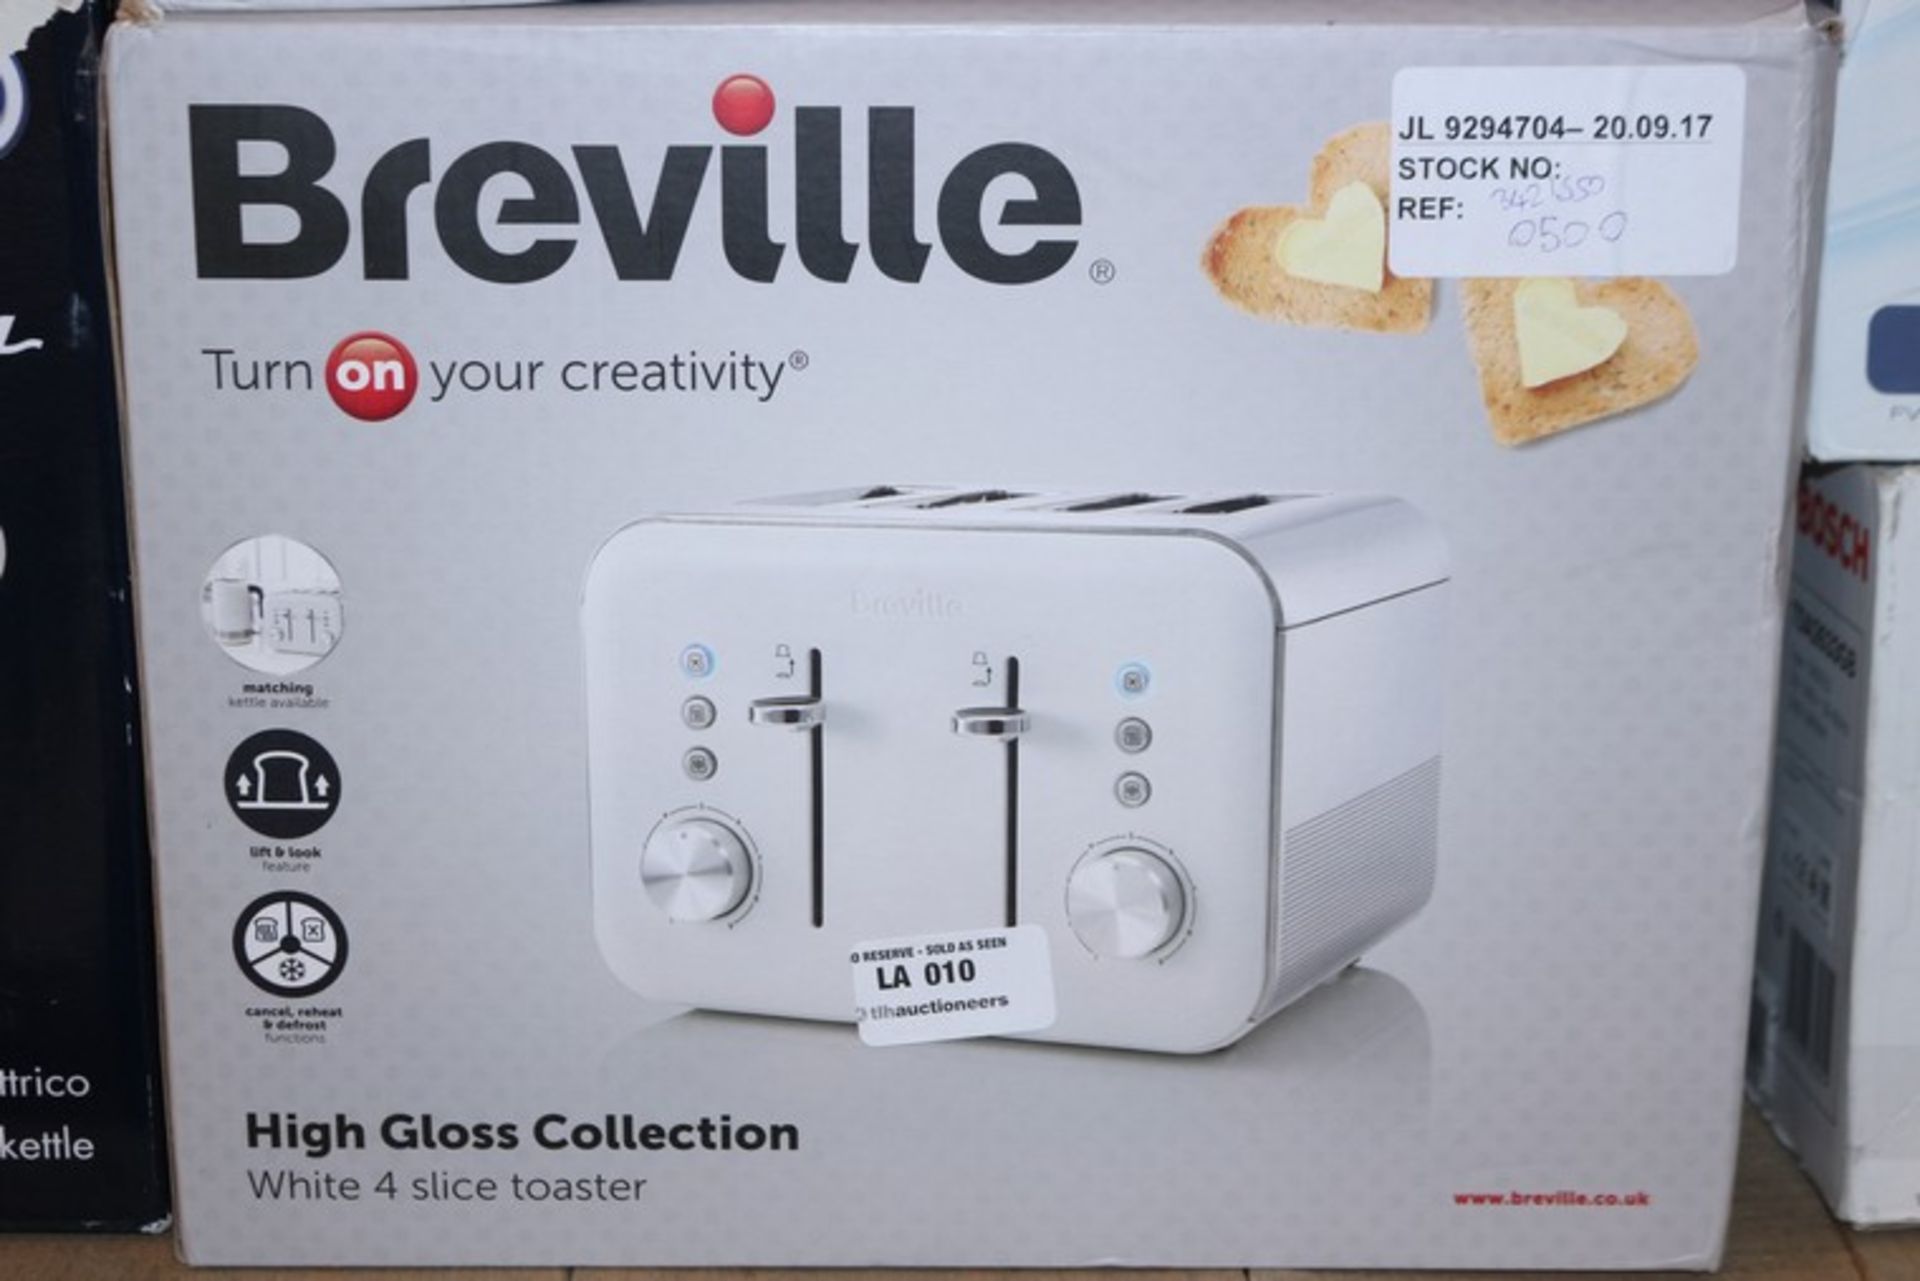 1 x BOXED BREVILLE HIGH GLOSS WHITE 4 SLICE TOASTER RRP £50 (20.09.17) (3421550) *PLEASE NOTE THAT